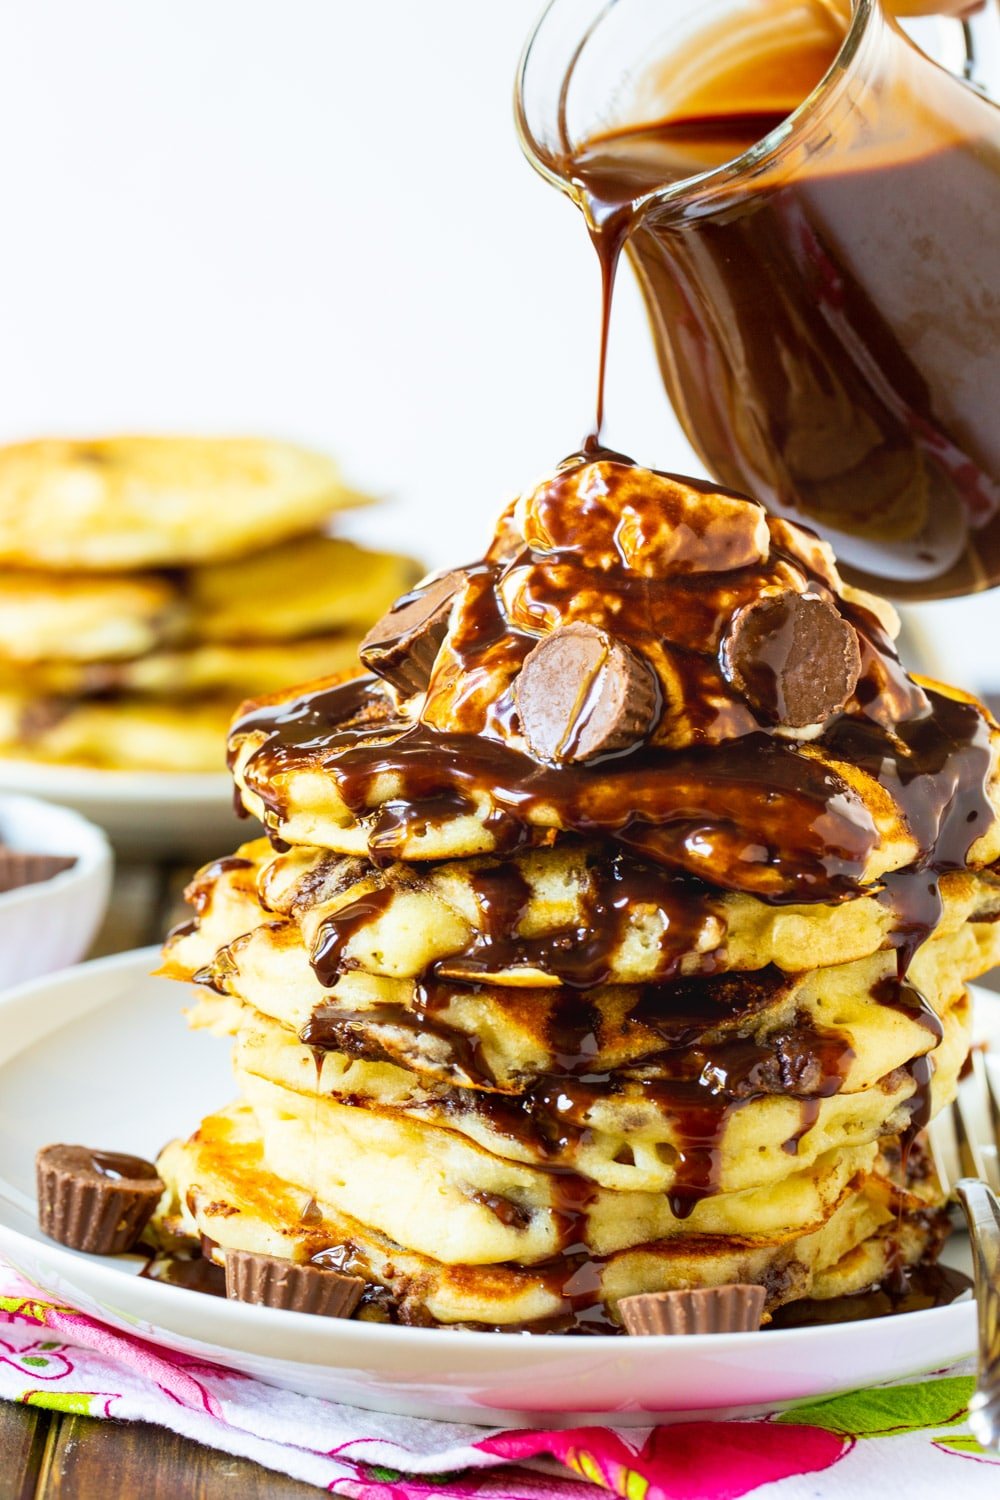 Chocolate sauce being poured on top of stack of pancakes